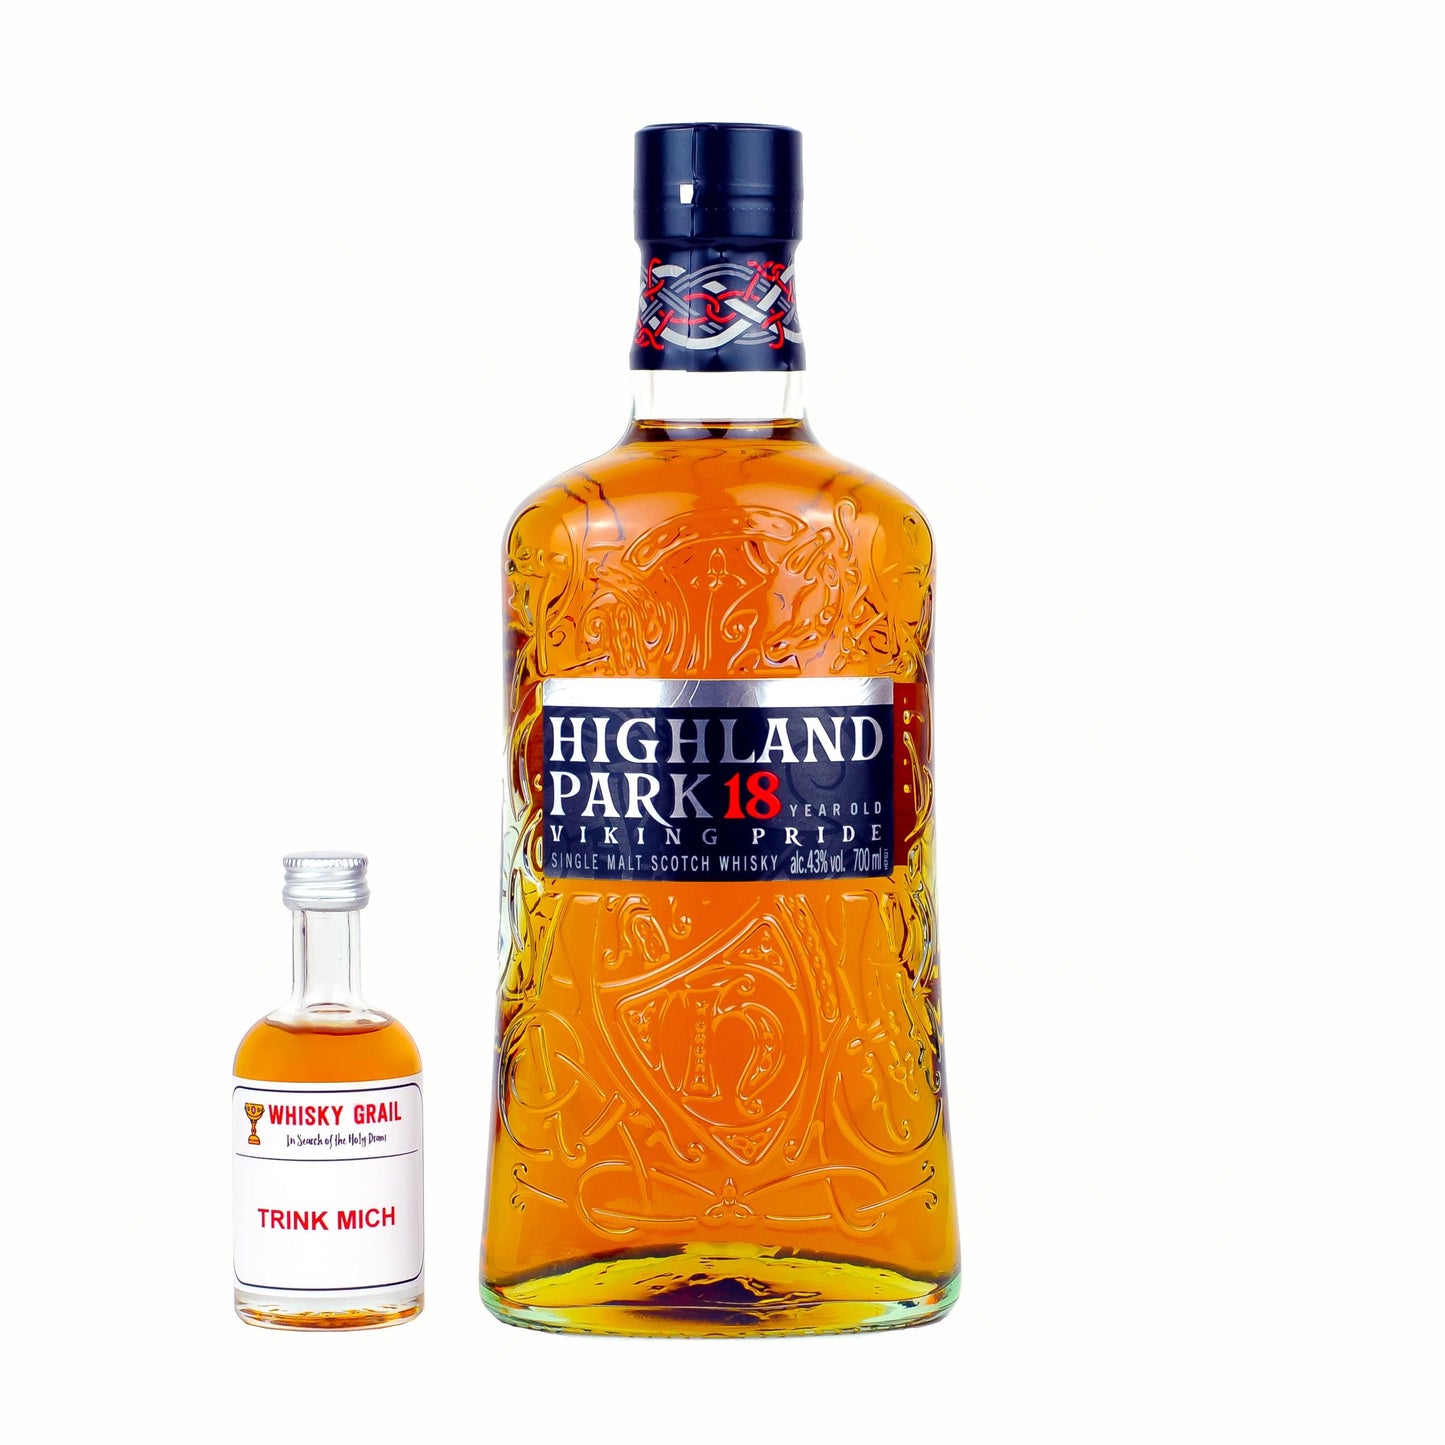 Highland Park 18 Years Old Viking Pride <br>5cl - Whisky Grail